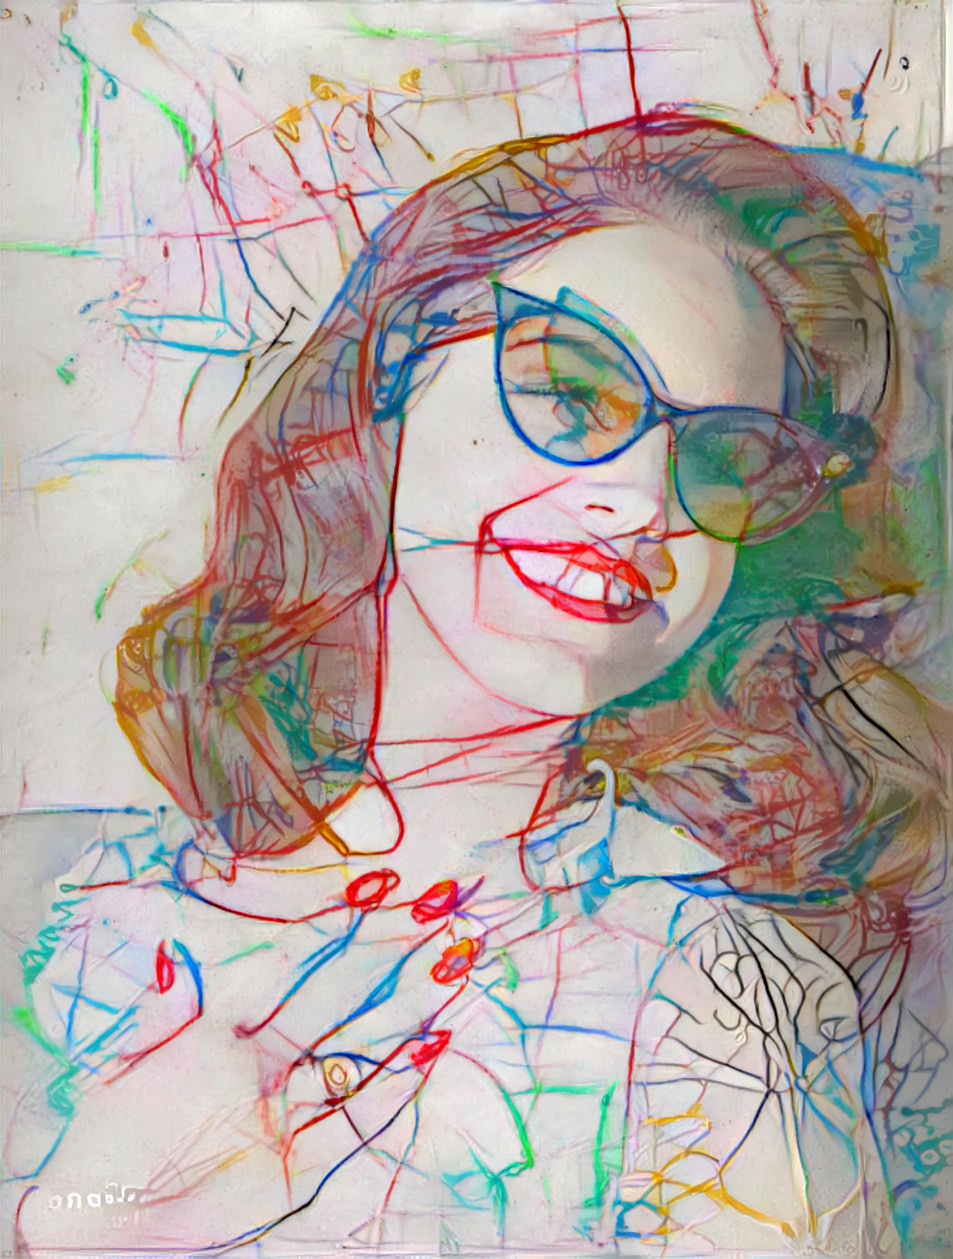 model in sunglasses touching collar, color crayons